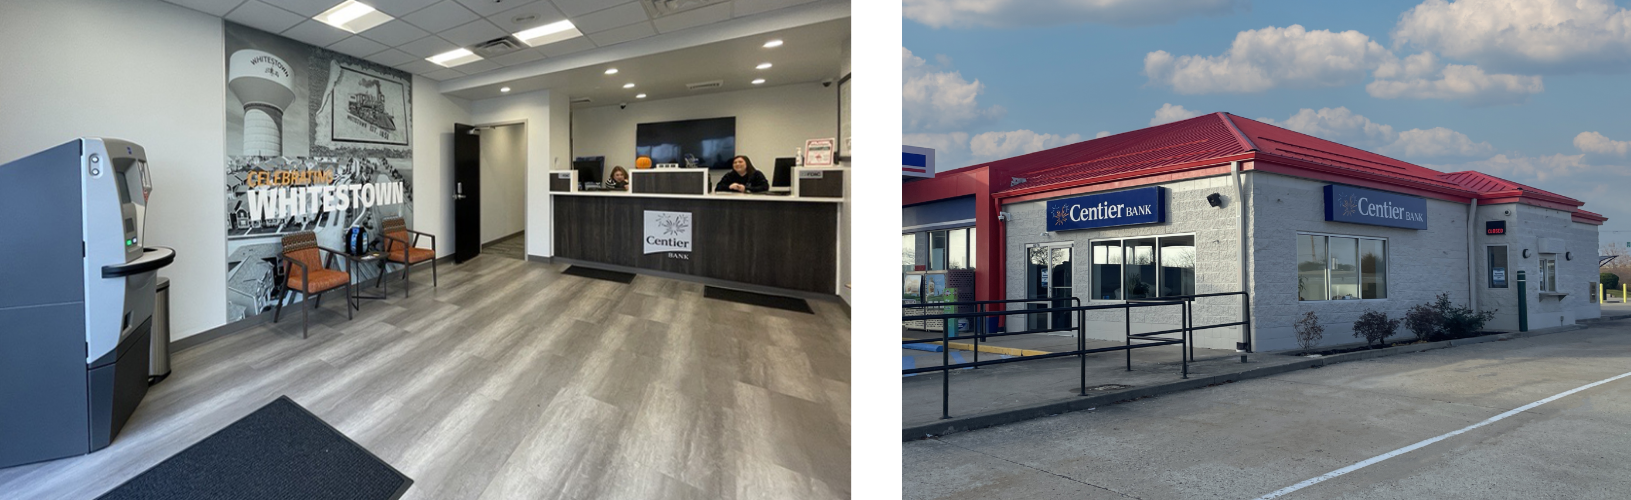 Pictures of Centier Whitestown Branch